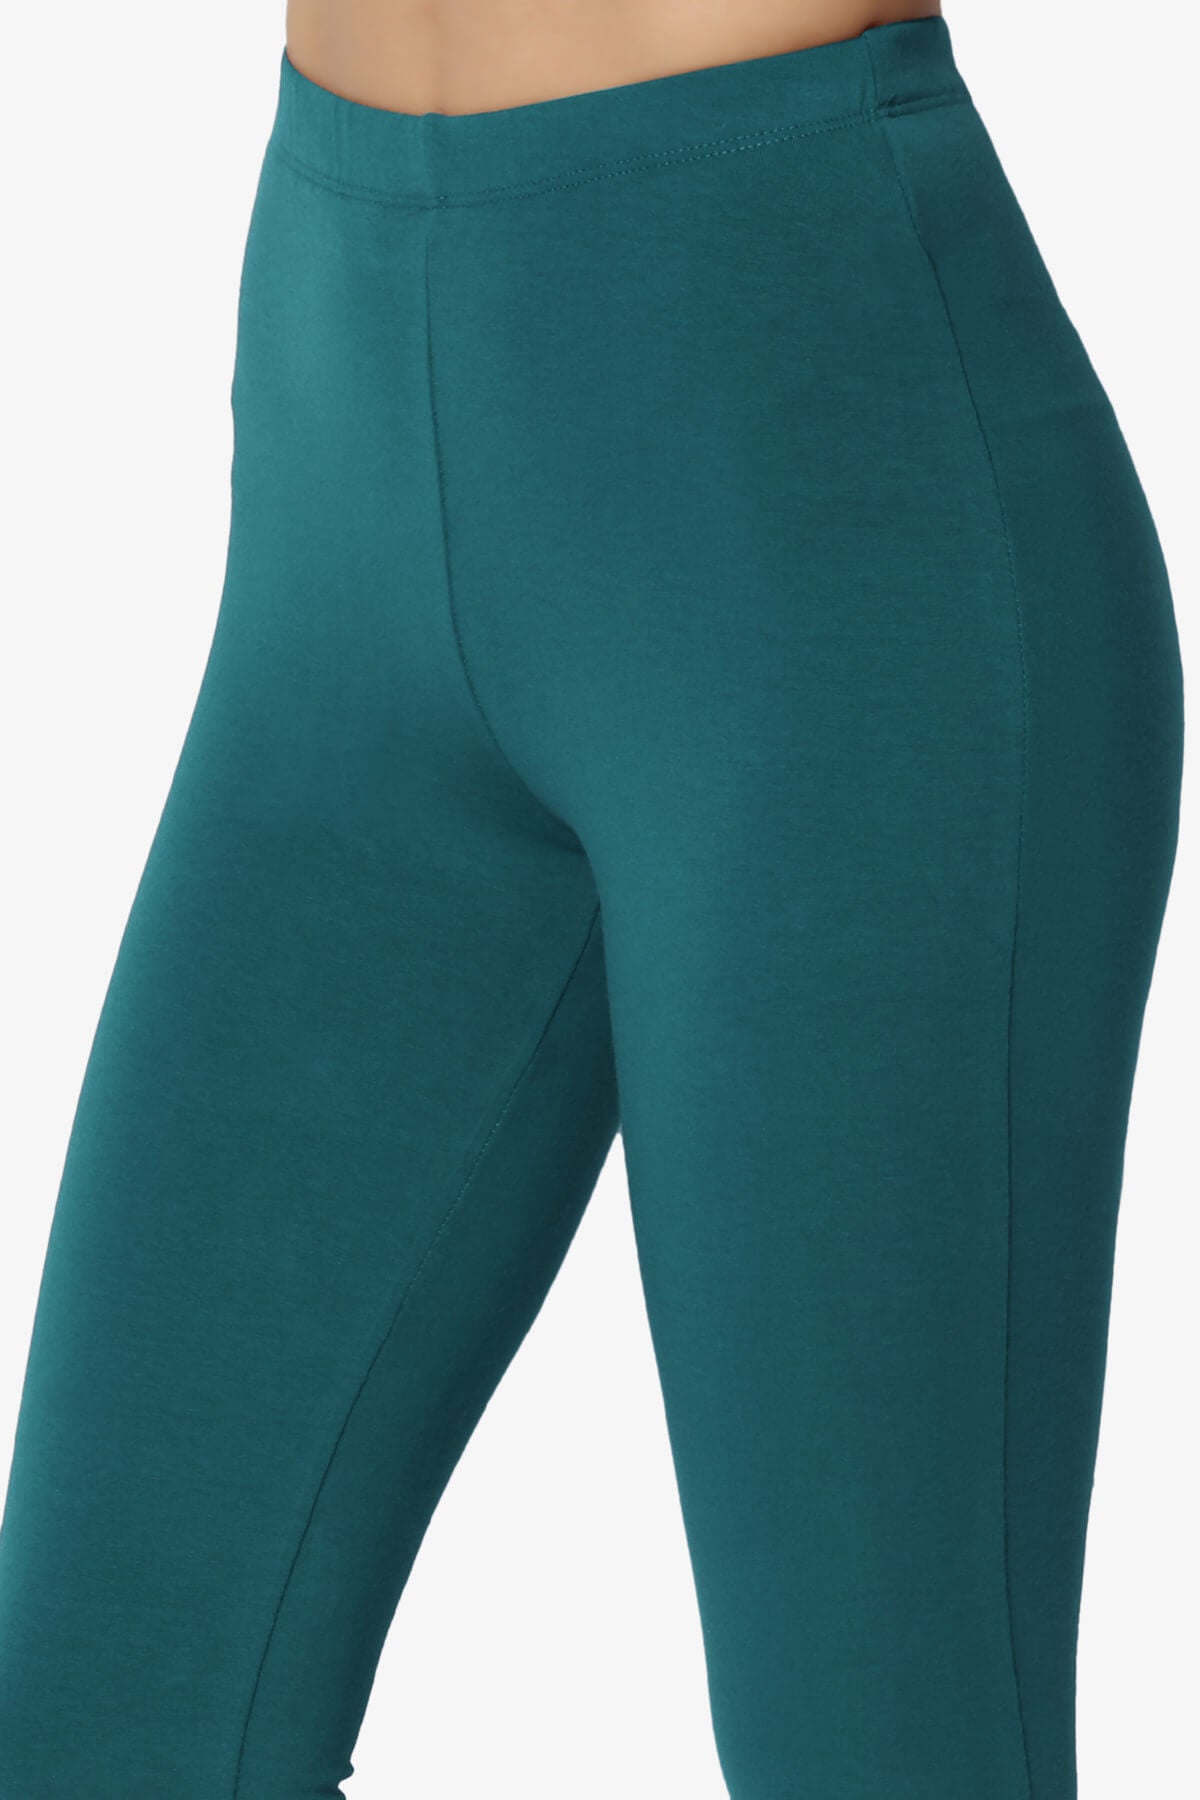 Load image into Gallery viewer, Ansley Luxe Cotton Capri Leggings TEAL_5
